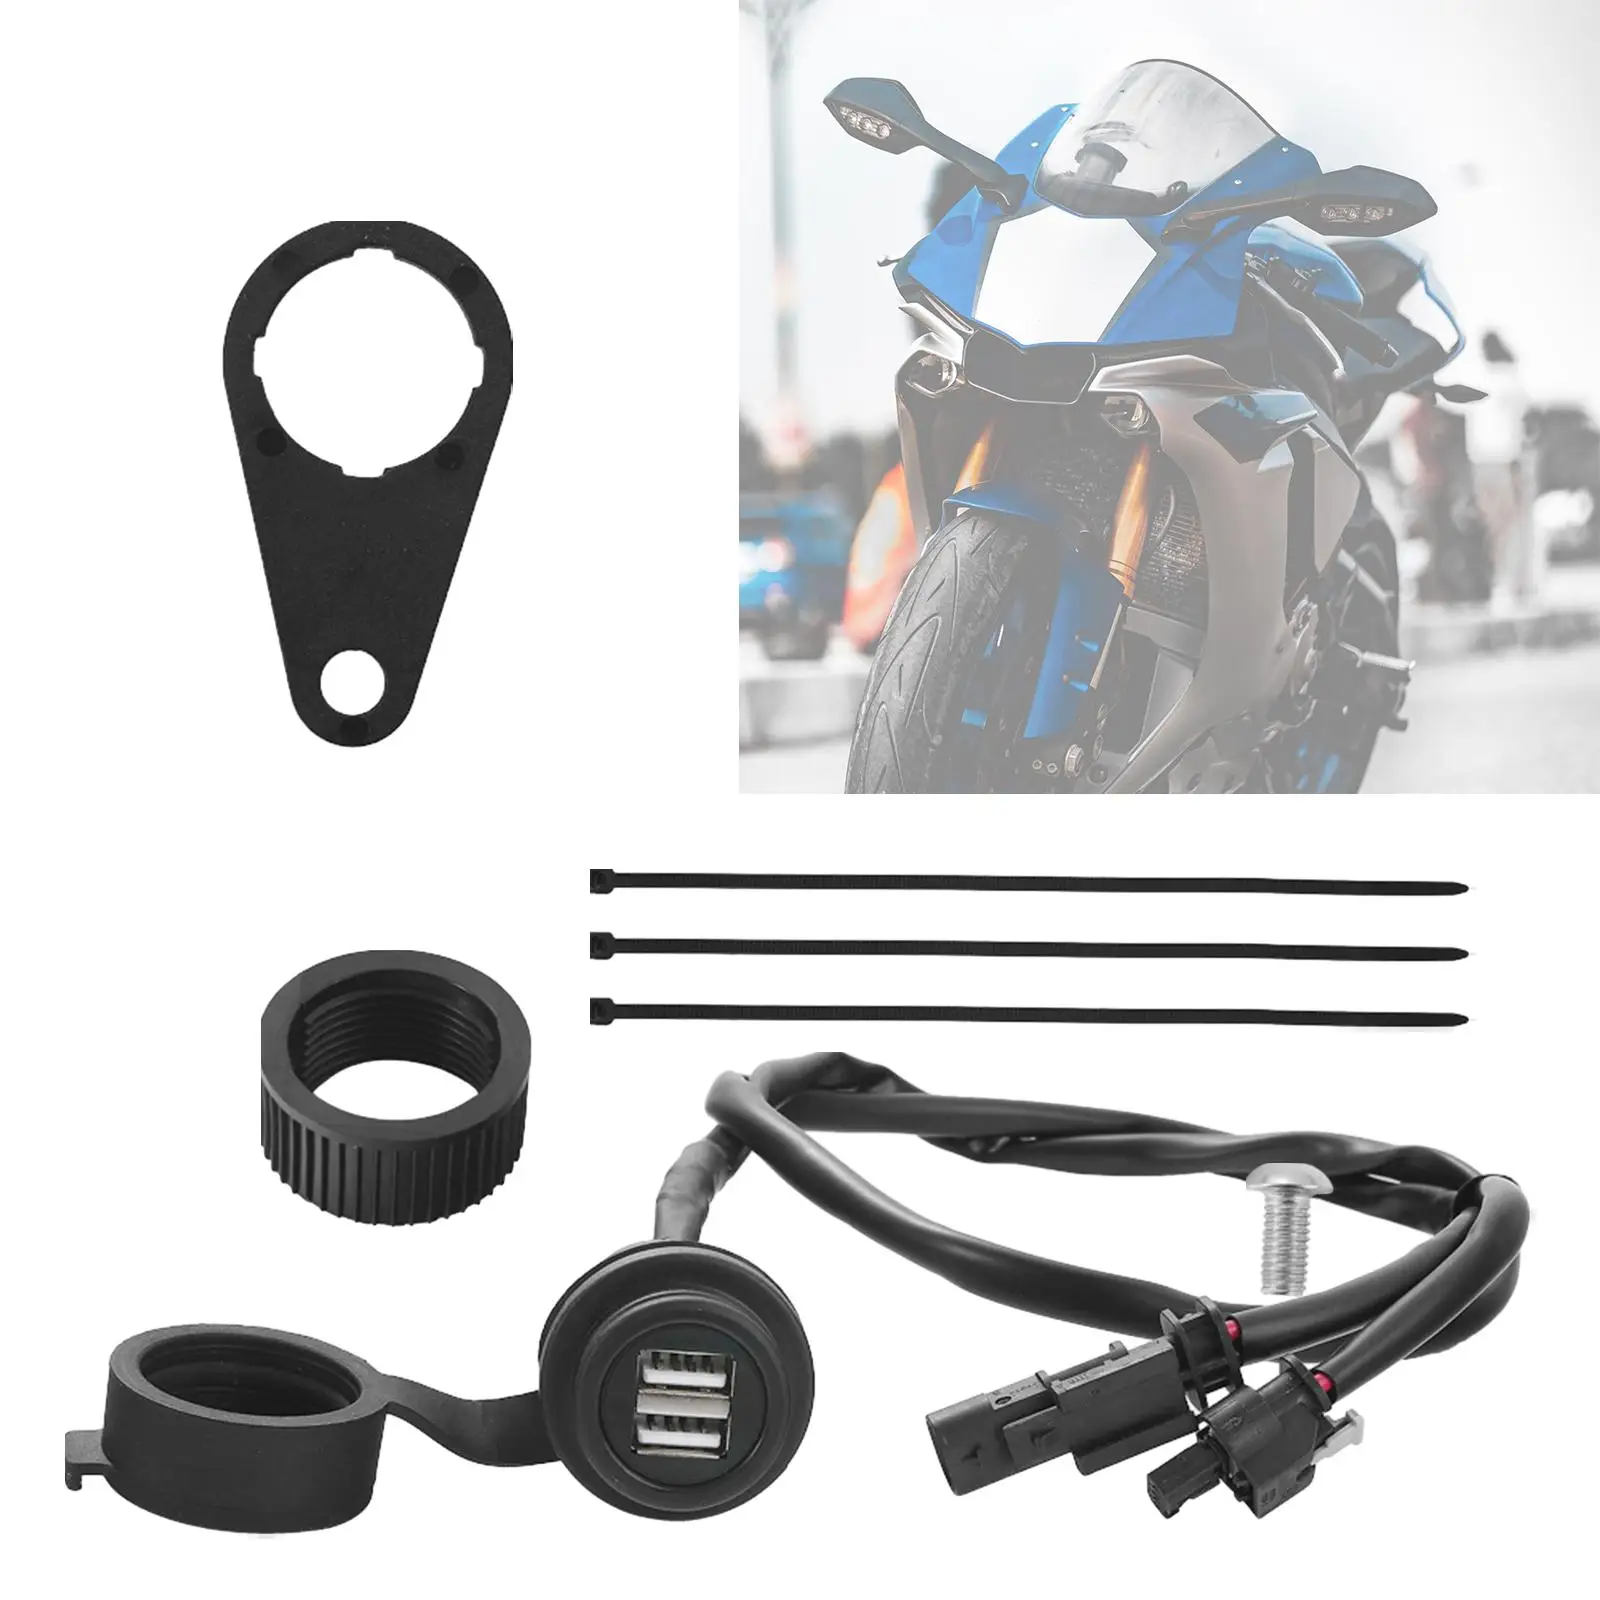 Motorcycle USB Charger Plug Base Plug and Play Dustproof Easy to Mount USB Adapter for BMW R1250GS R1200GS F700GS Supplies